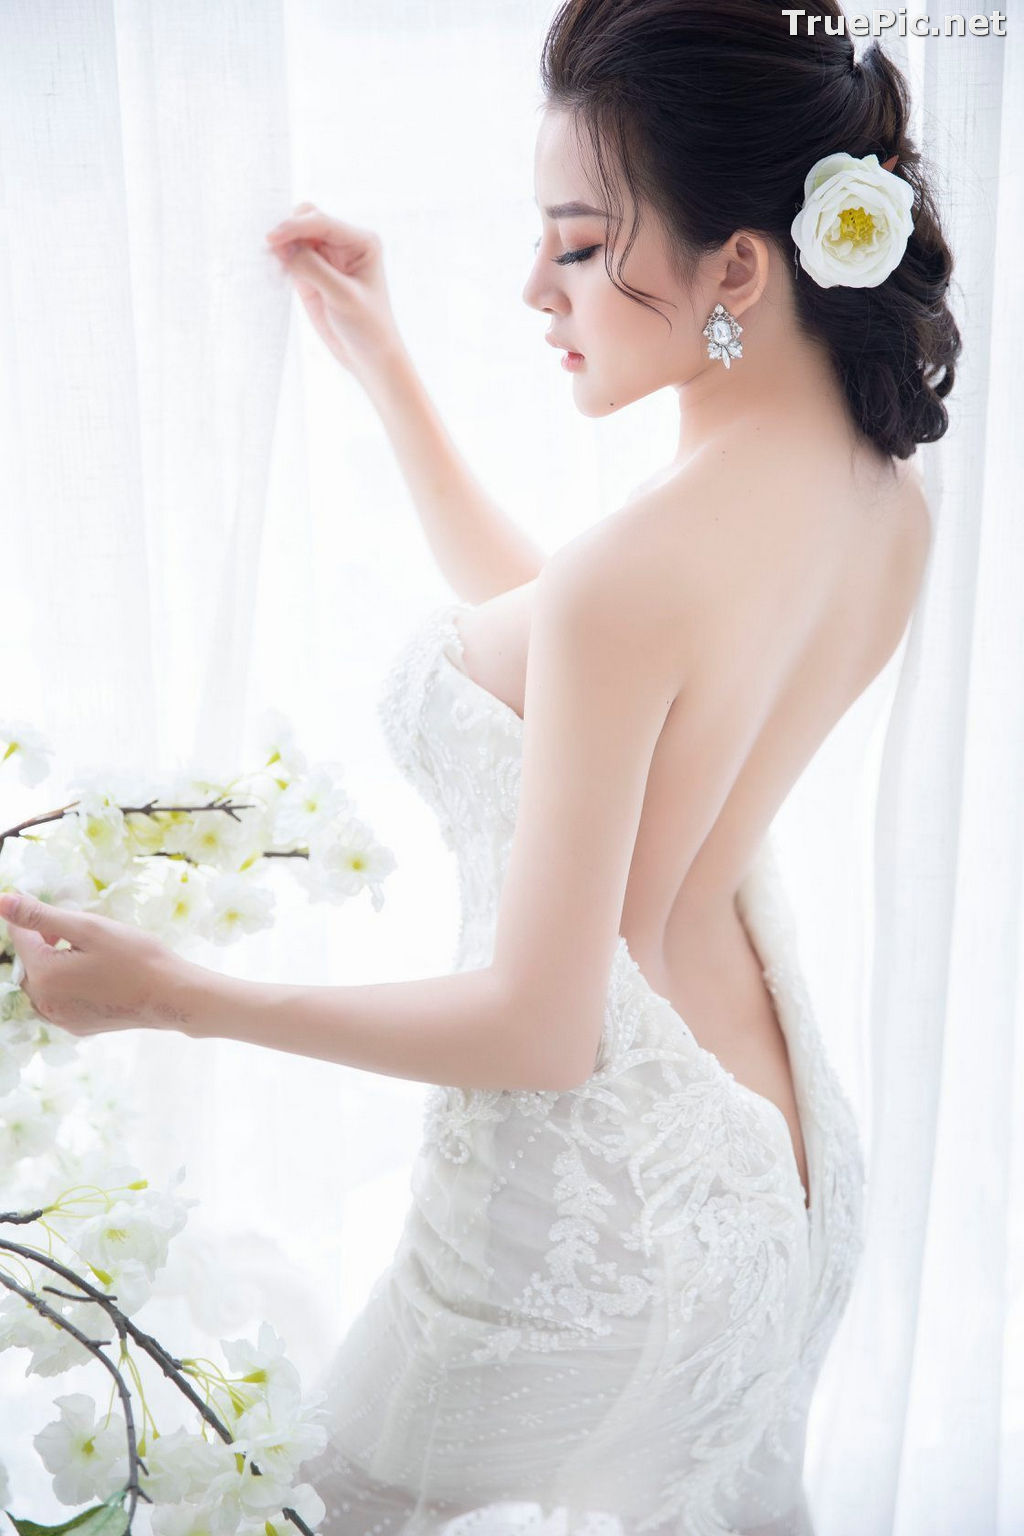 Image Vietnamese Model - Hot Beautiful Girls In White Collection - TruePic.net - Picture-28